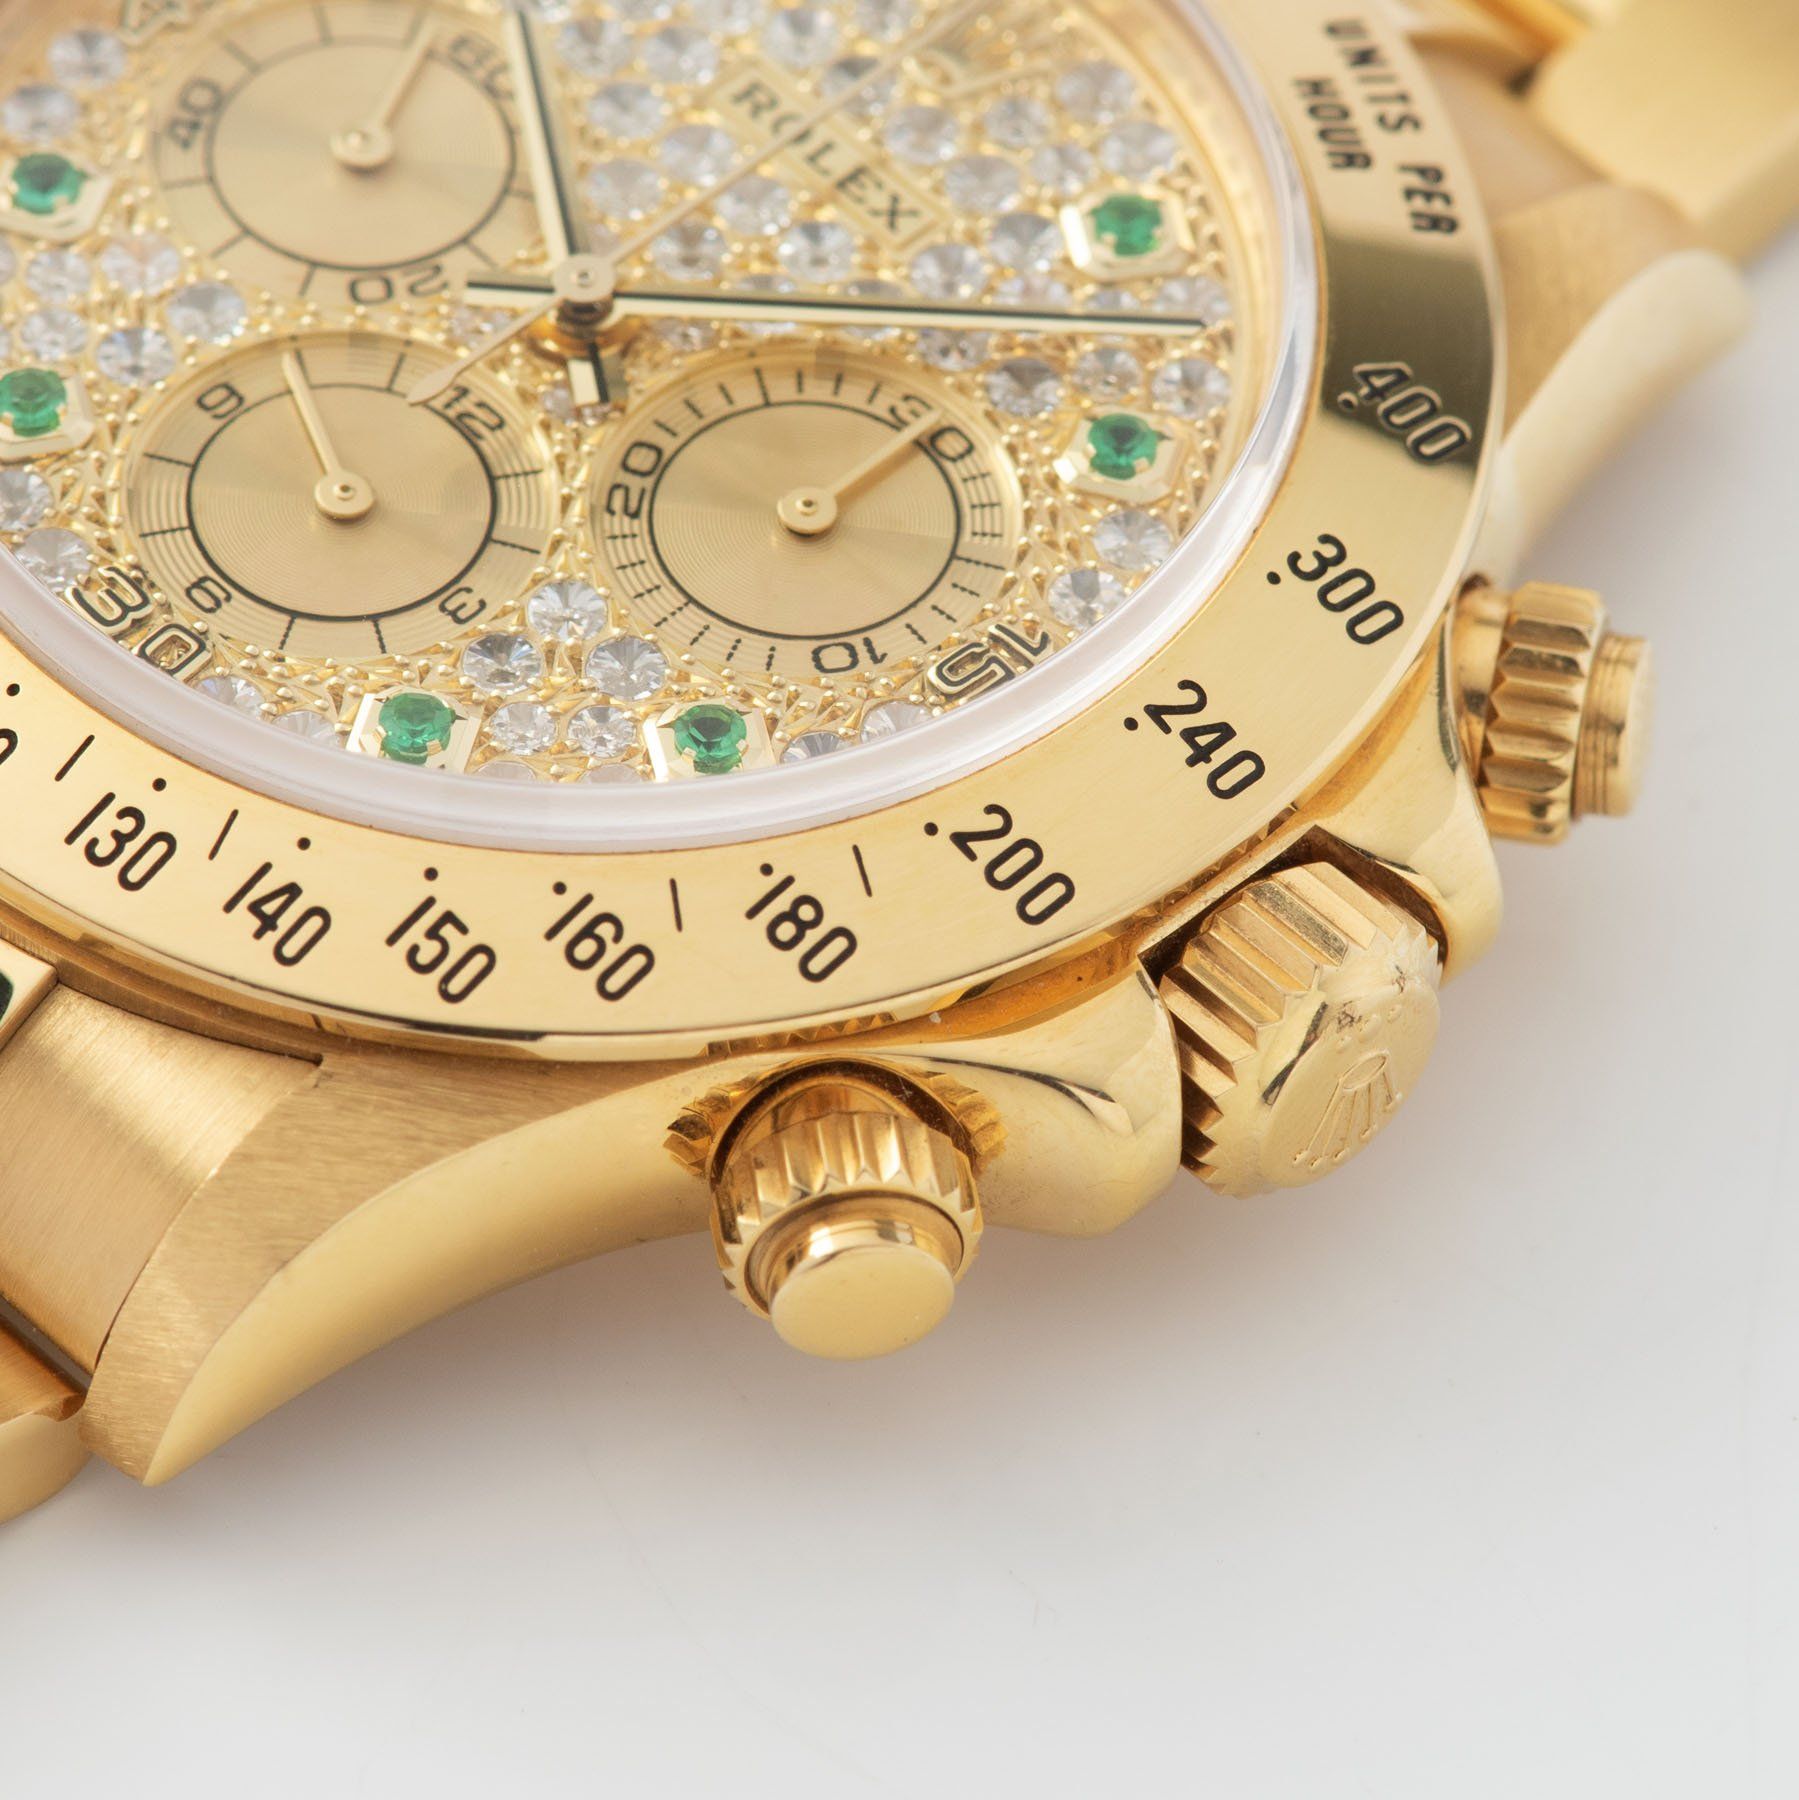 Rolex Cosmograph Daytona 16528 Pave Dial with Emerald Hours